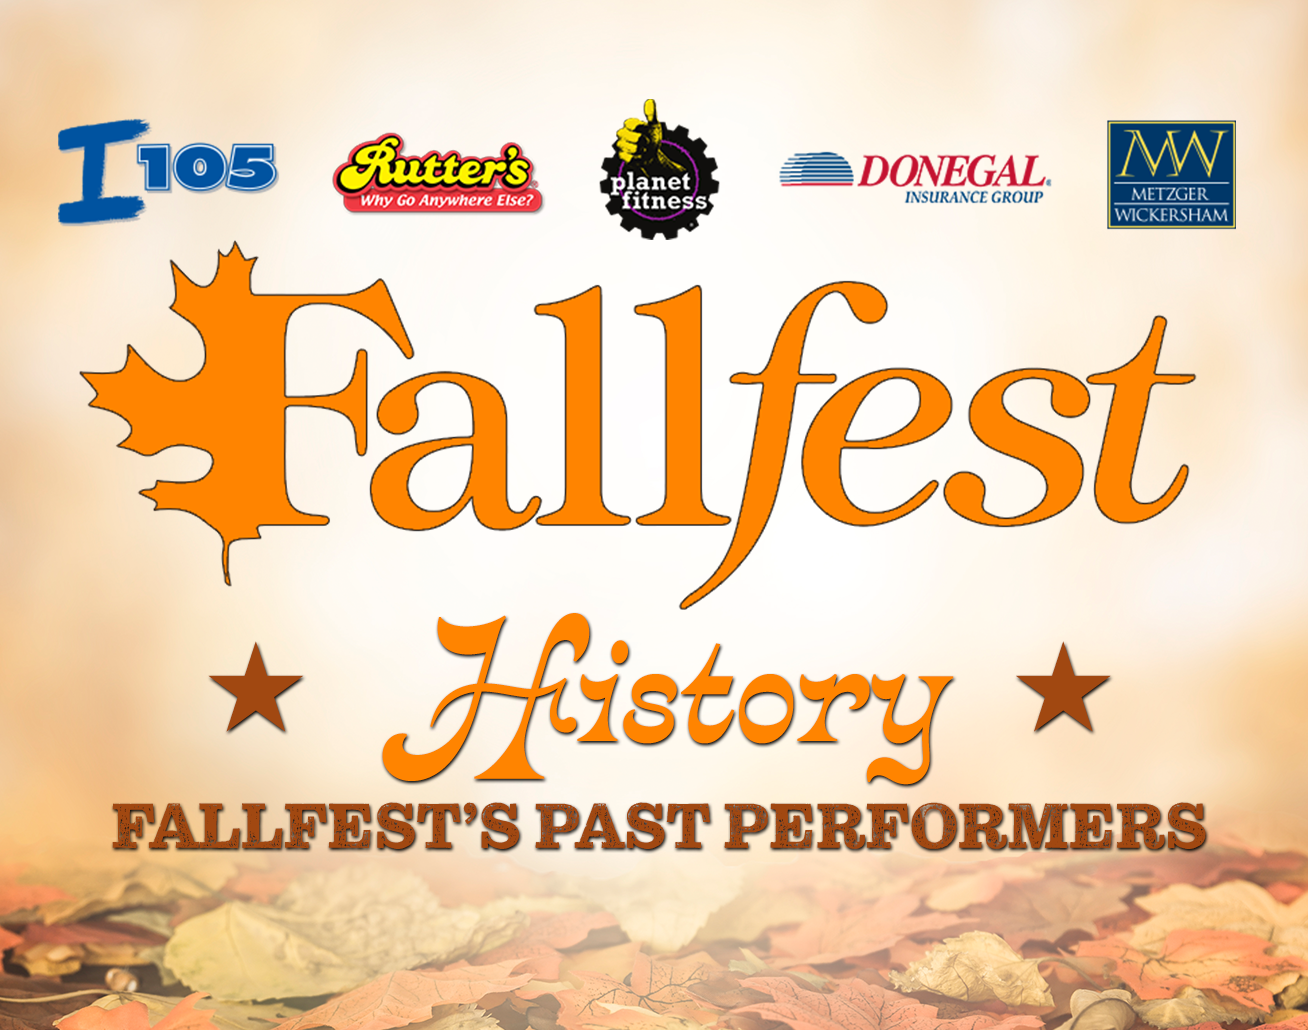 I105 FallFest History – Past Performers